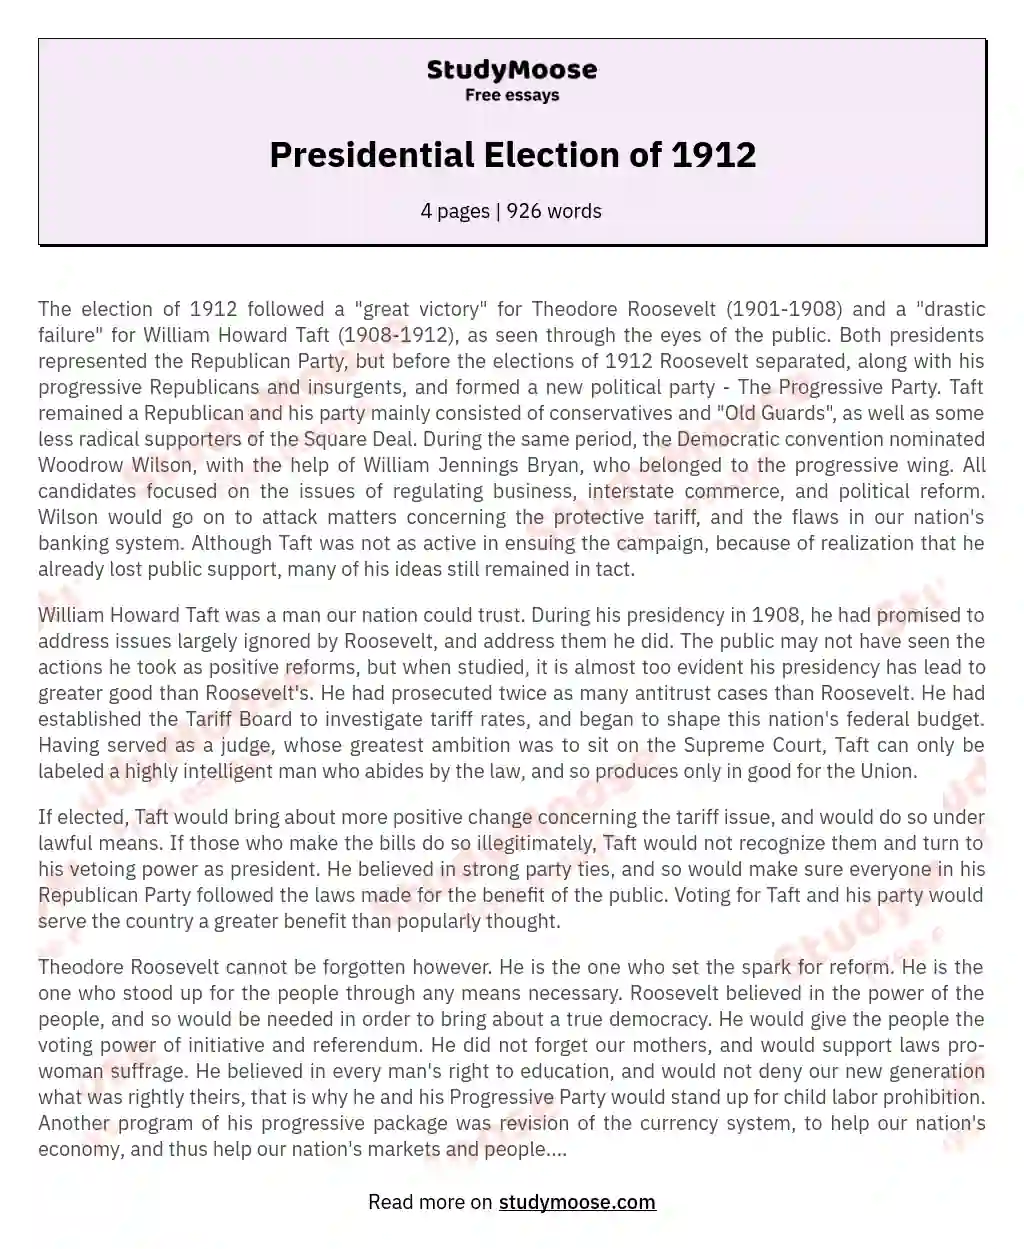 Presidential Election of 1912